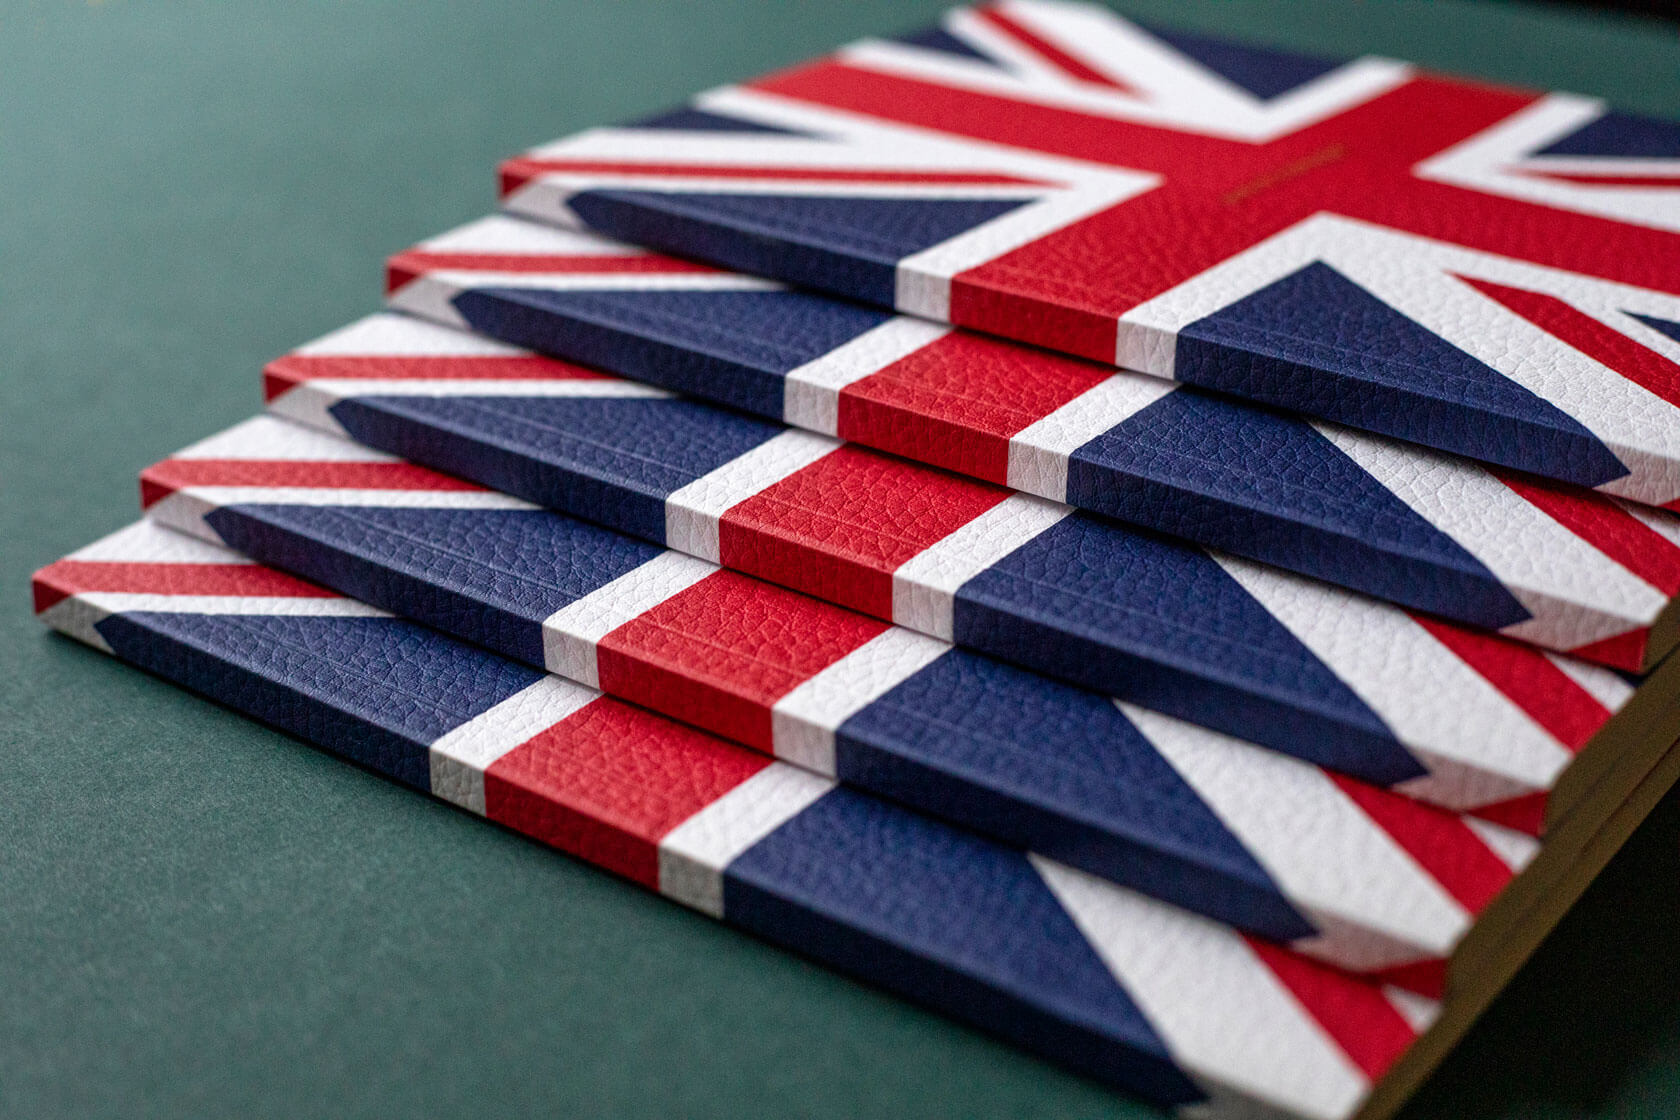 textured red white and blue union jack luxury notebooks stacked 